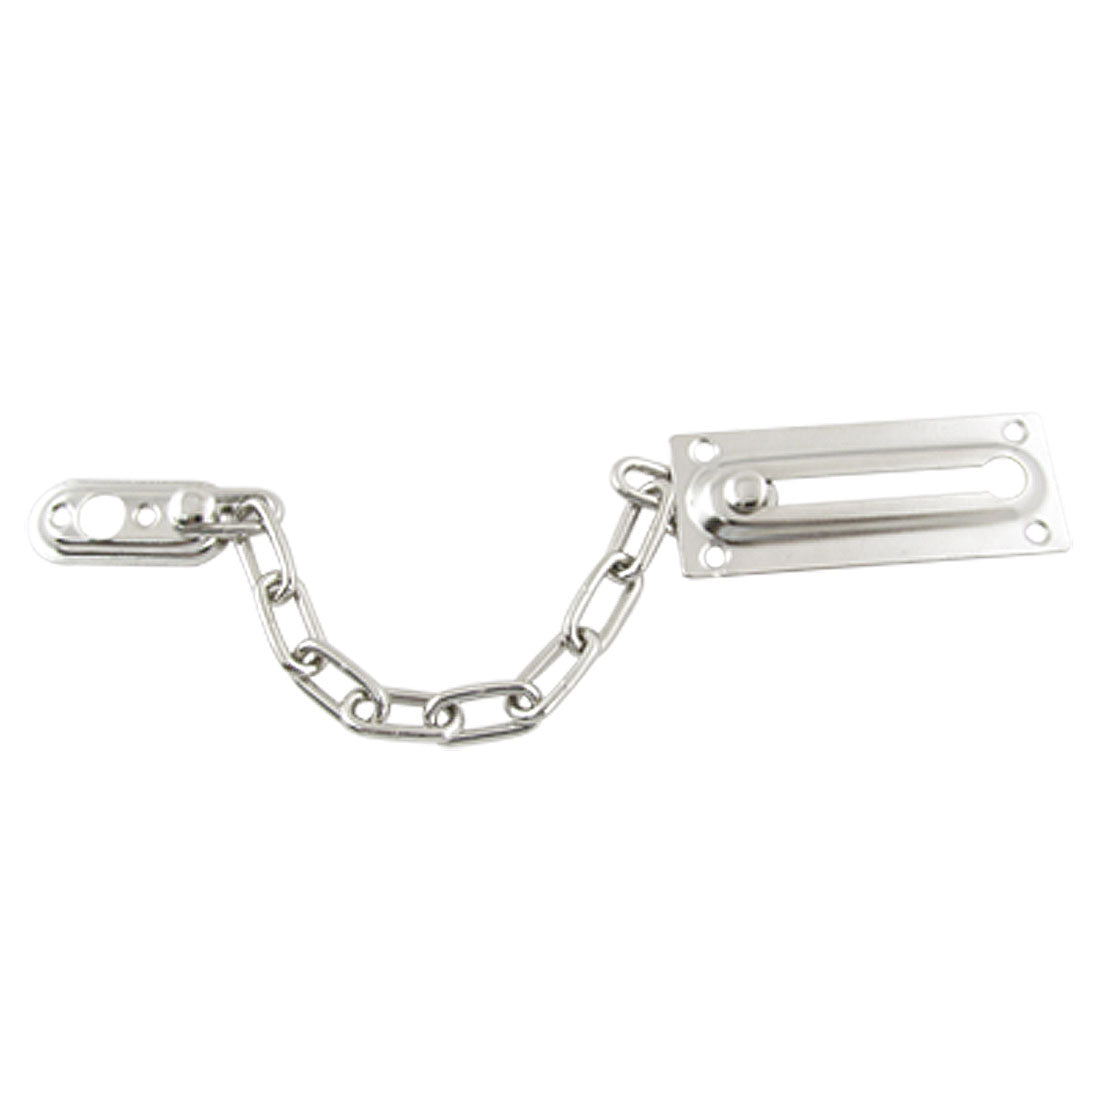 uxcell Uxcell Silver Tone Security Door Dead Bolt Chain Guard Fastener